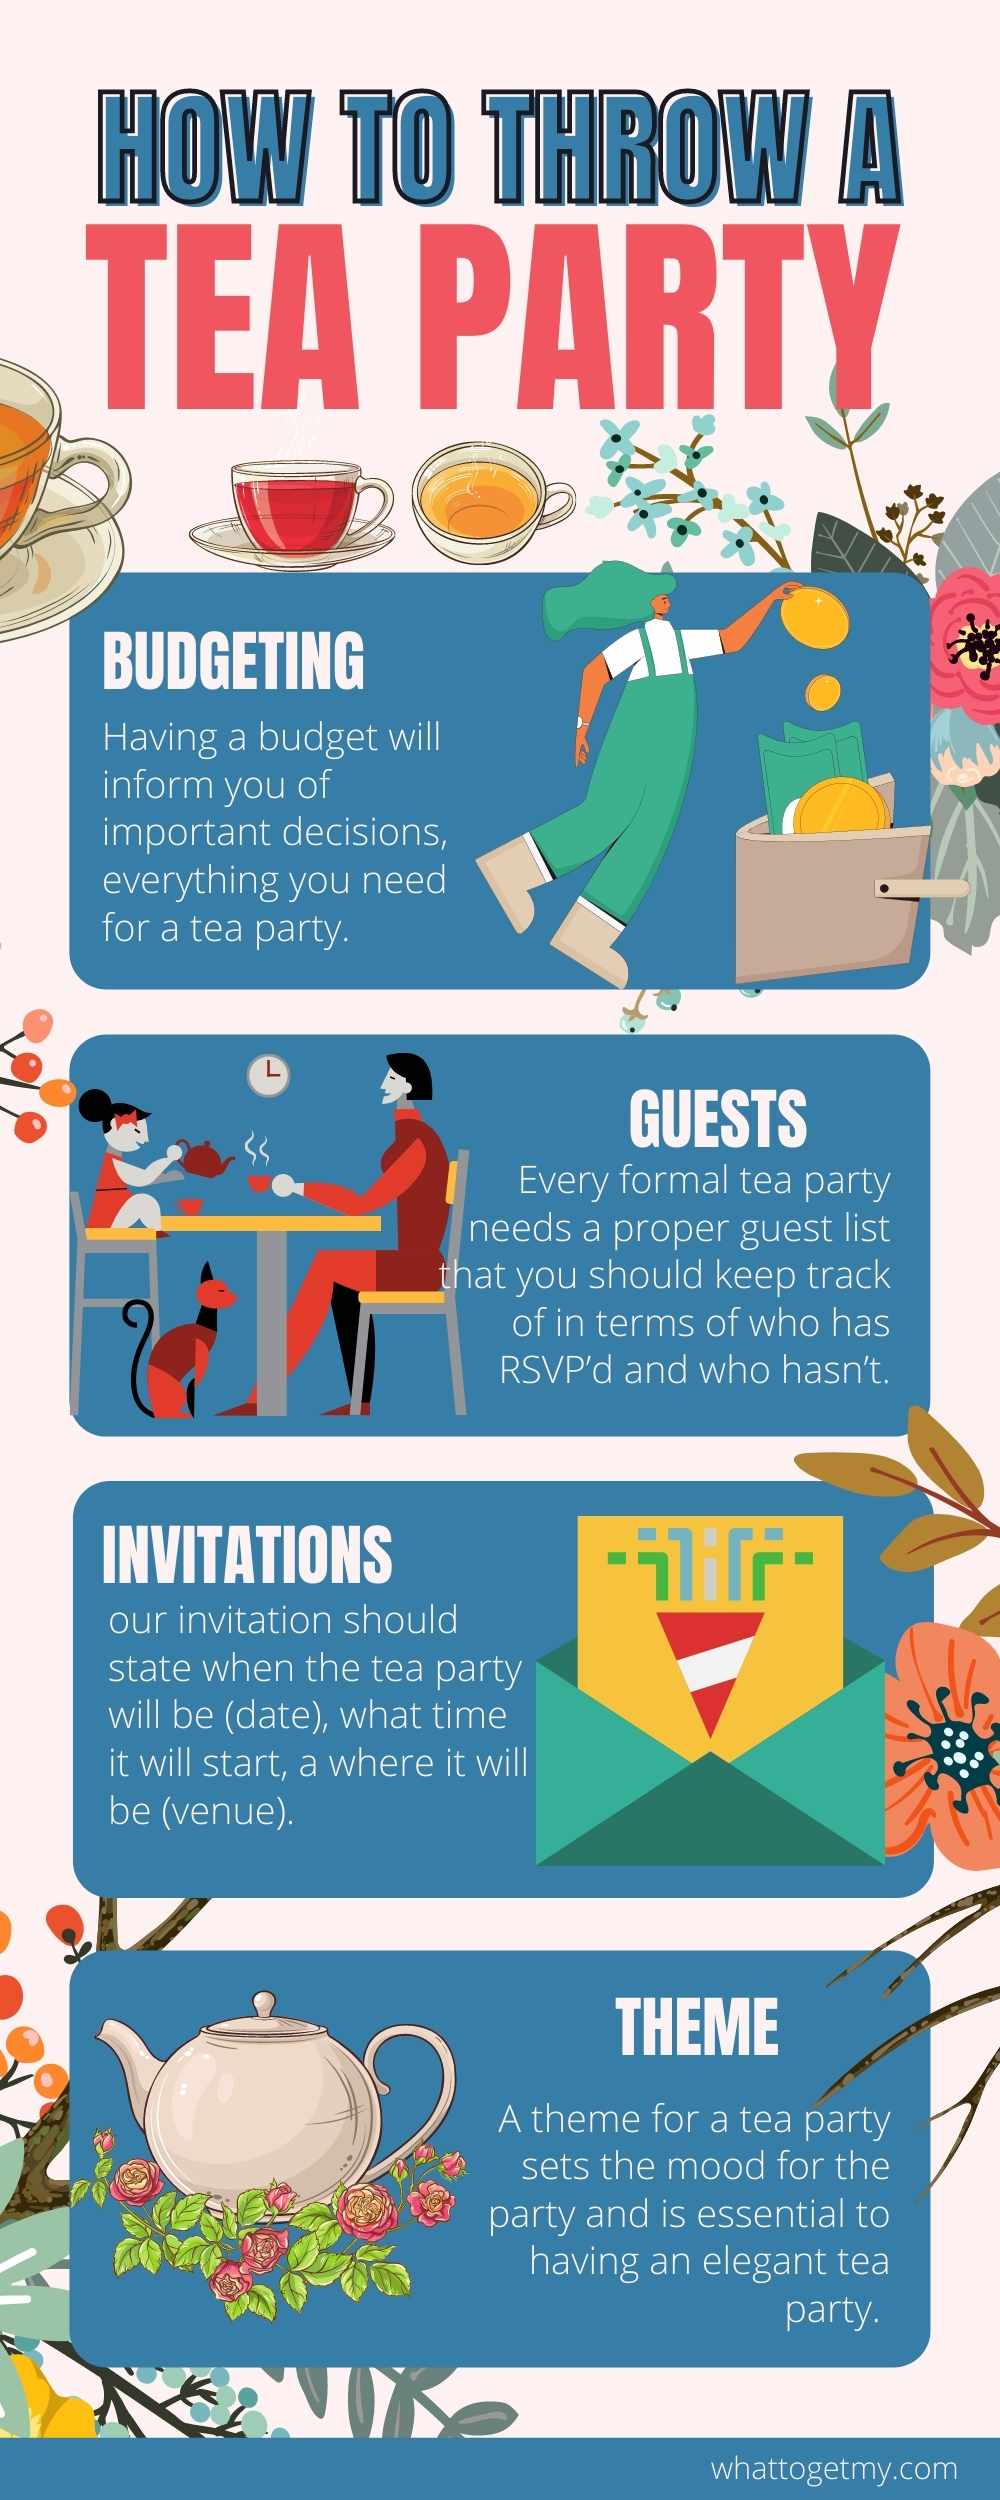 How to Throw a Tea Party